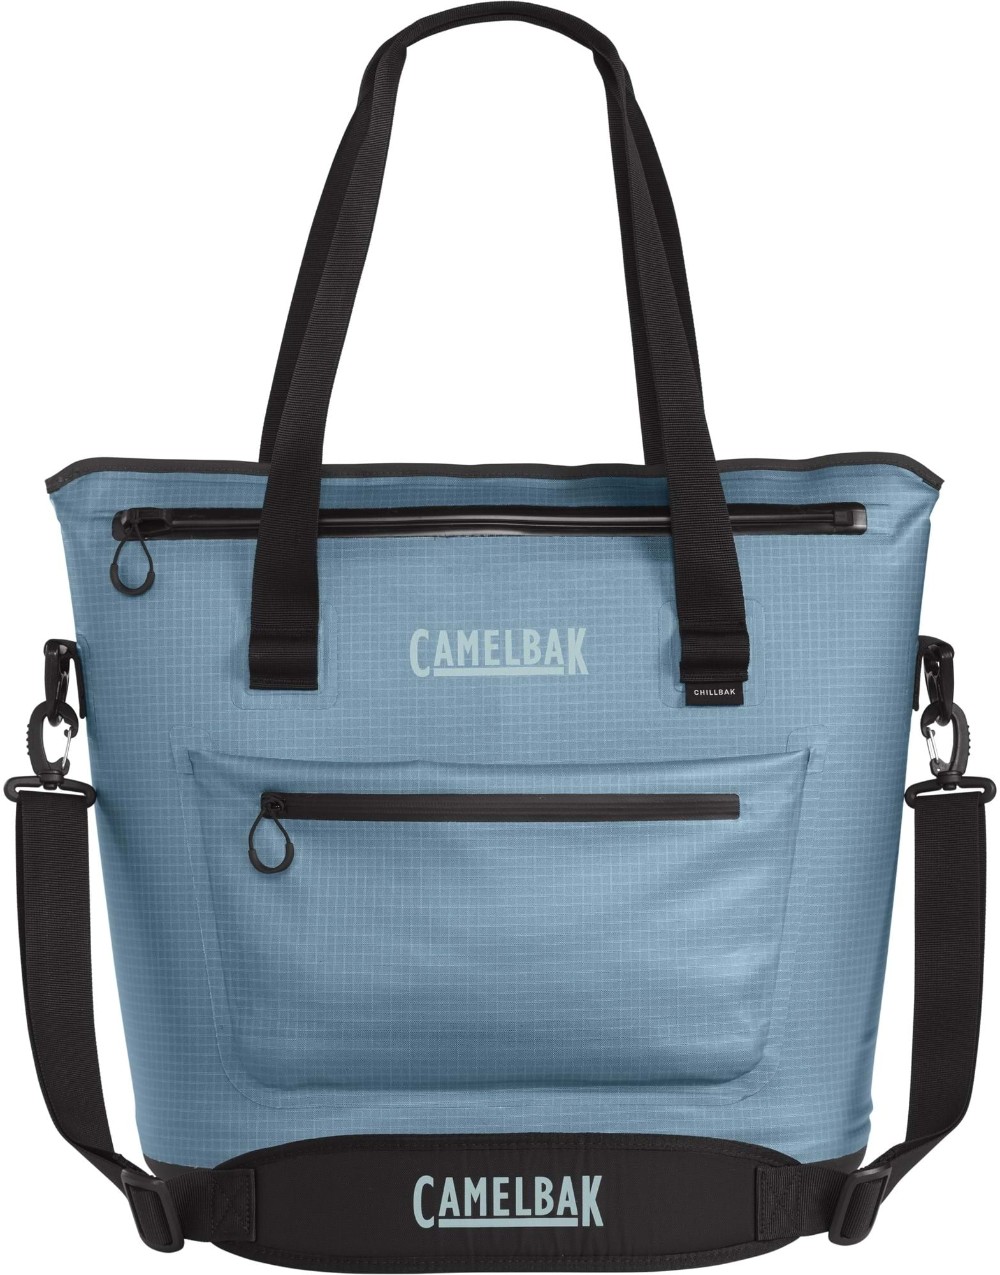 ChillBak Tote 18L Soft Cooler with 3L Fusion Group Reservoir image 0